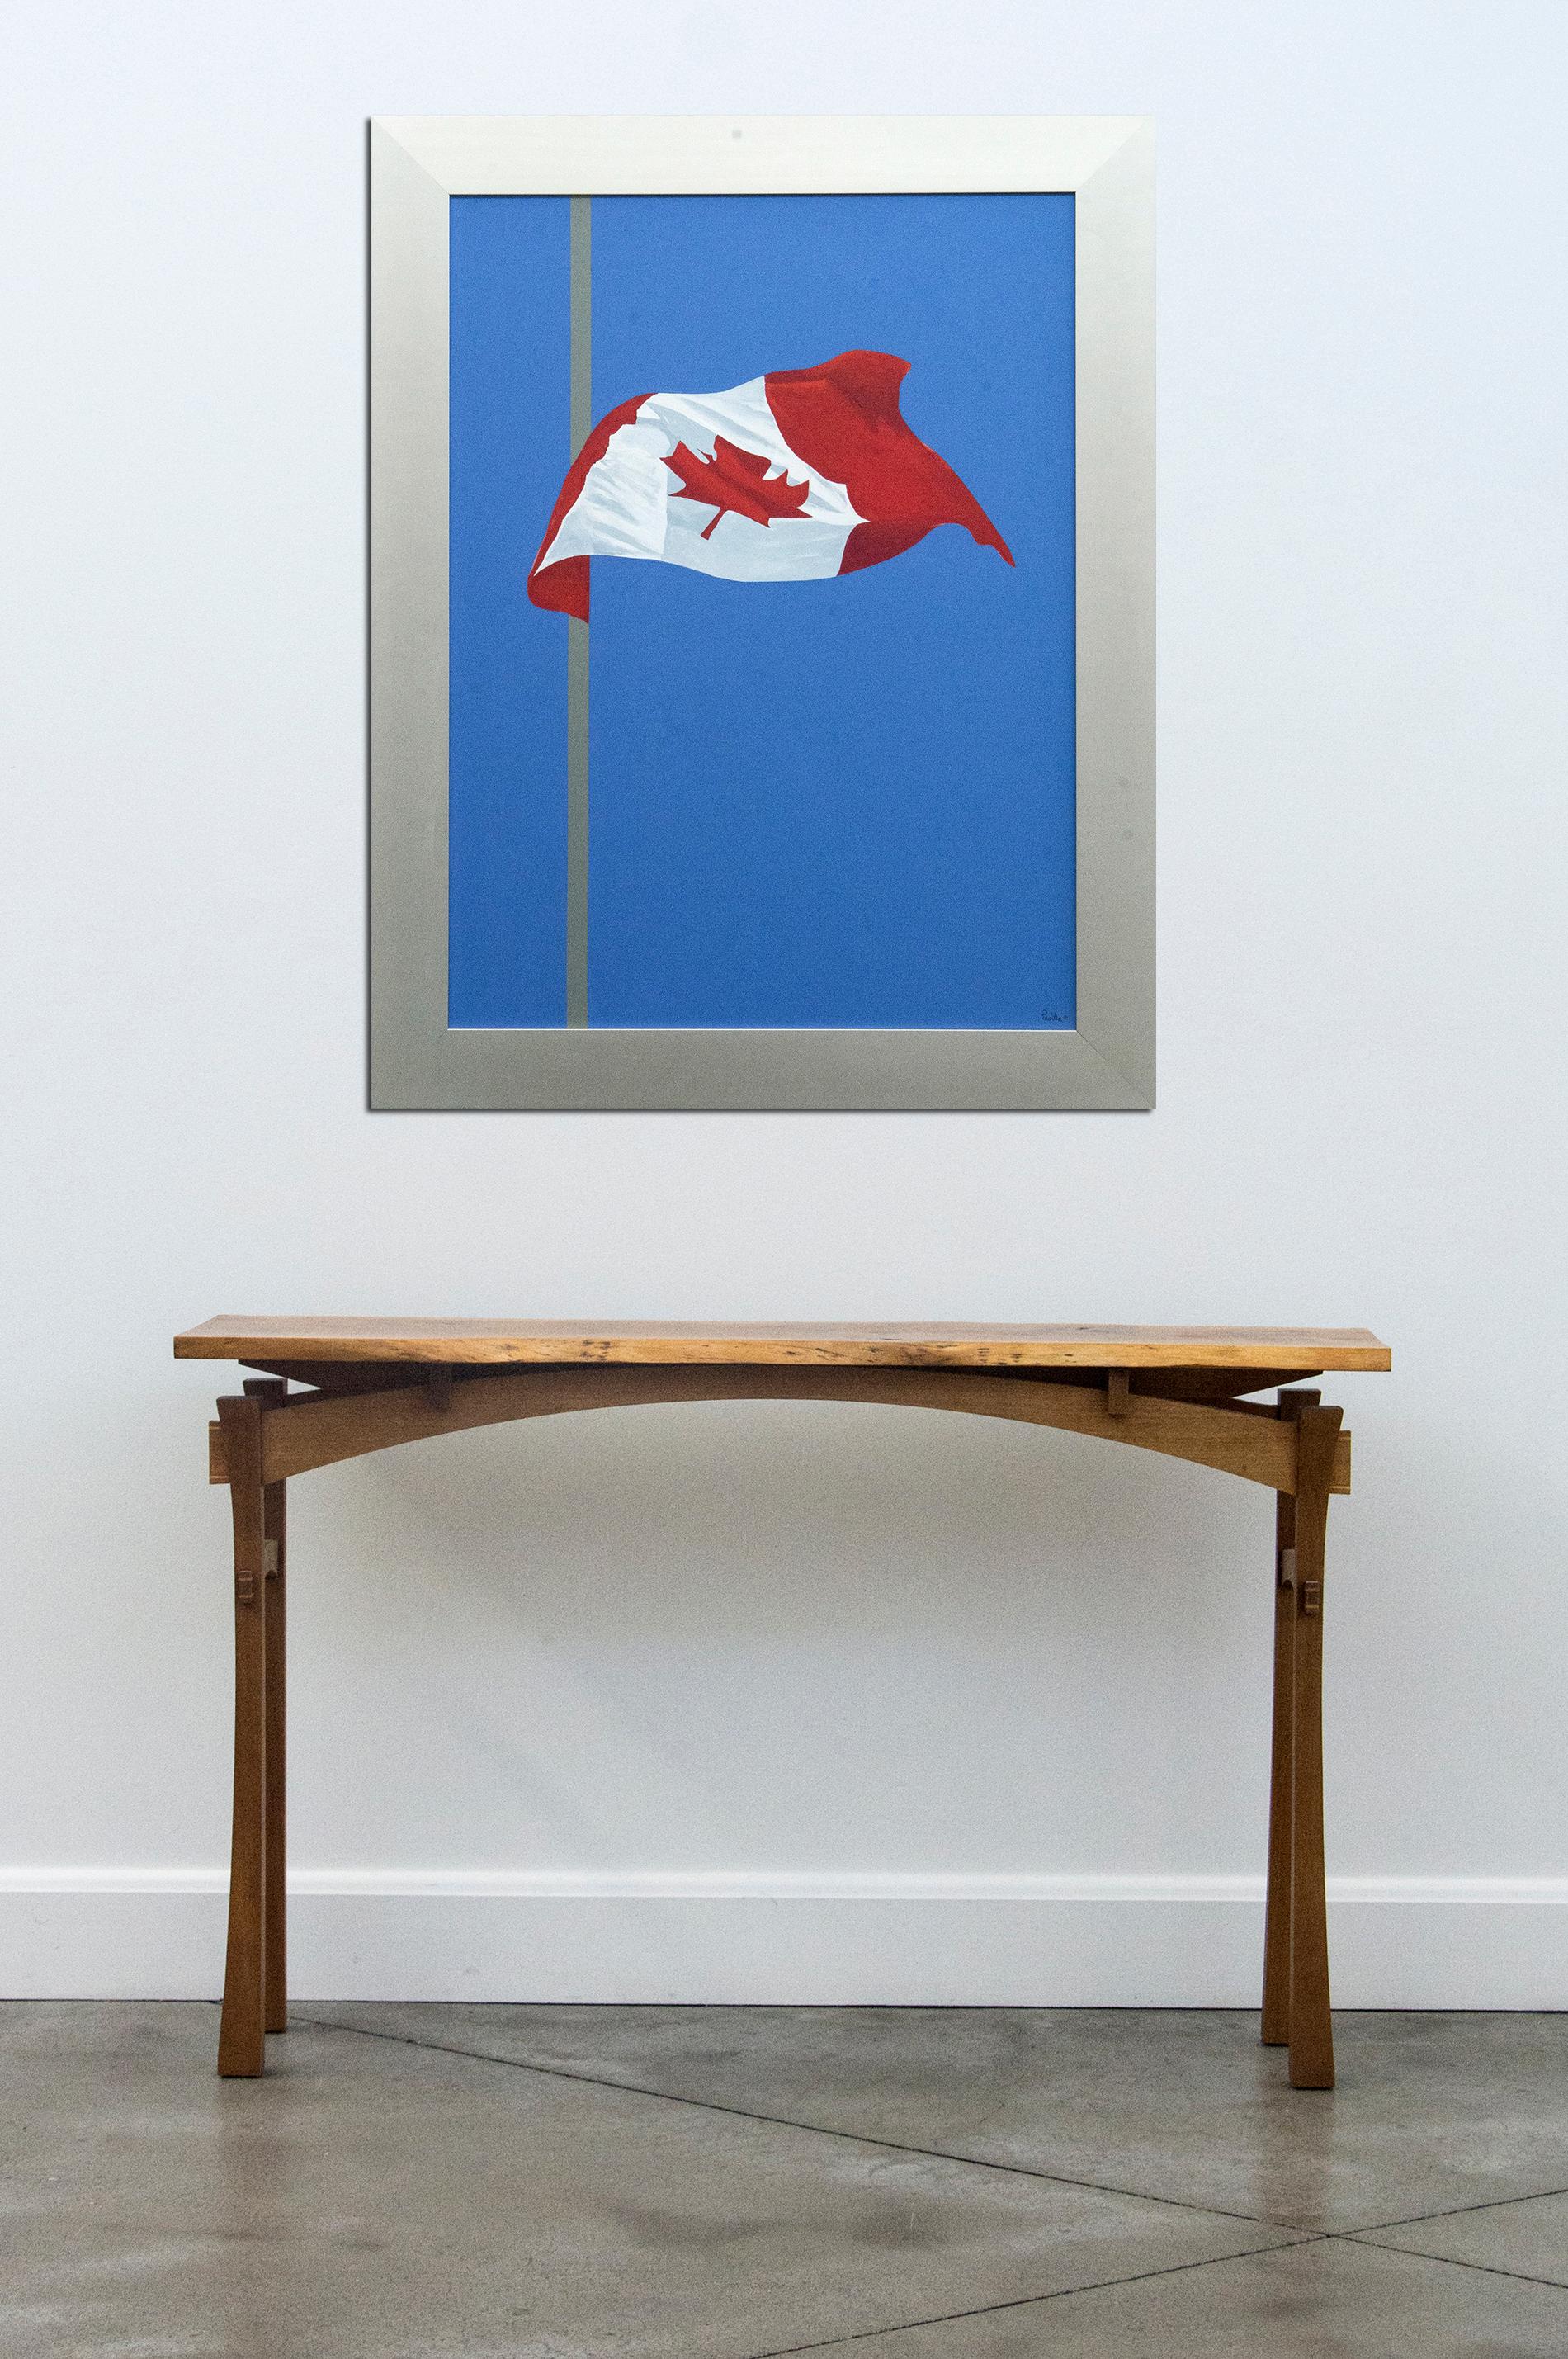 A Canadian flag flies high against a clear blue sky in this iconic image by Charles Pachter. Framed dimensions are 47 x 37 inches. 

Charles Pachter is a much admired Canadian artistic polymath, his work merging playful even irreverent elements